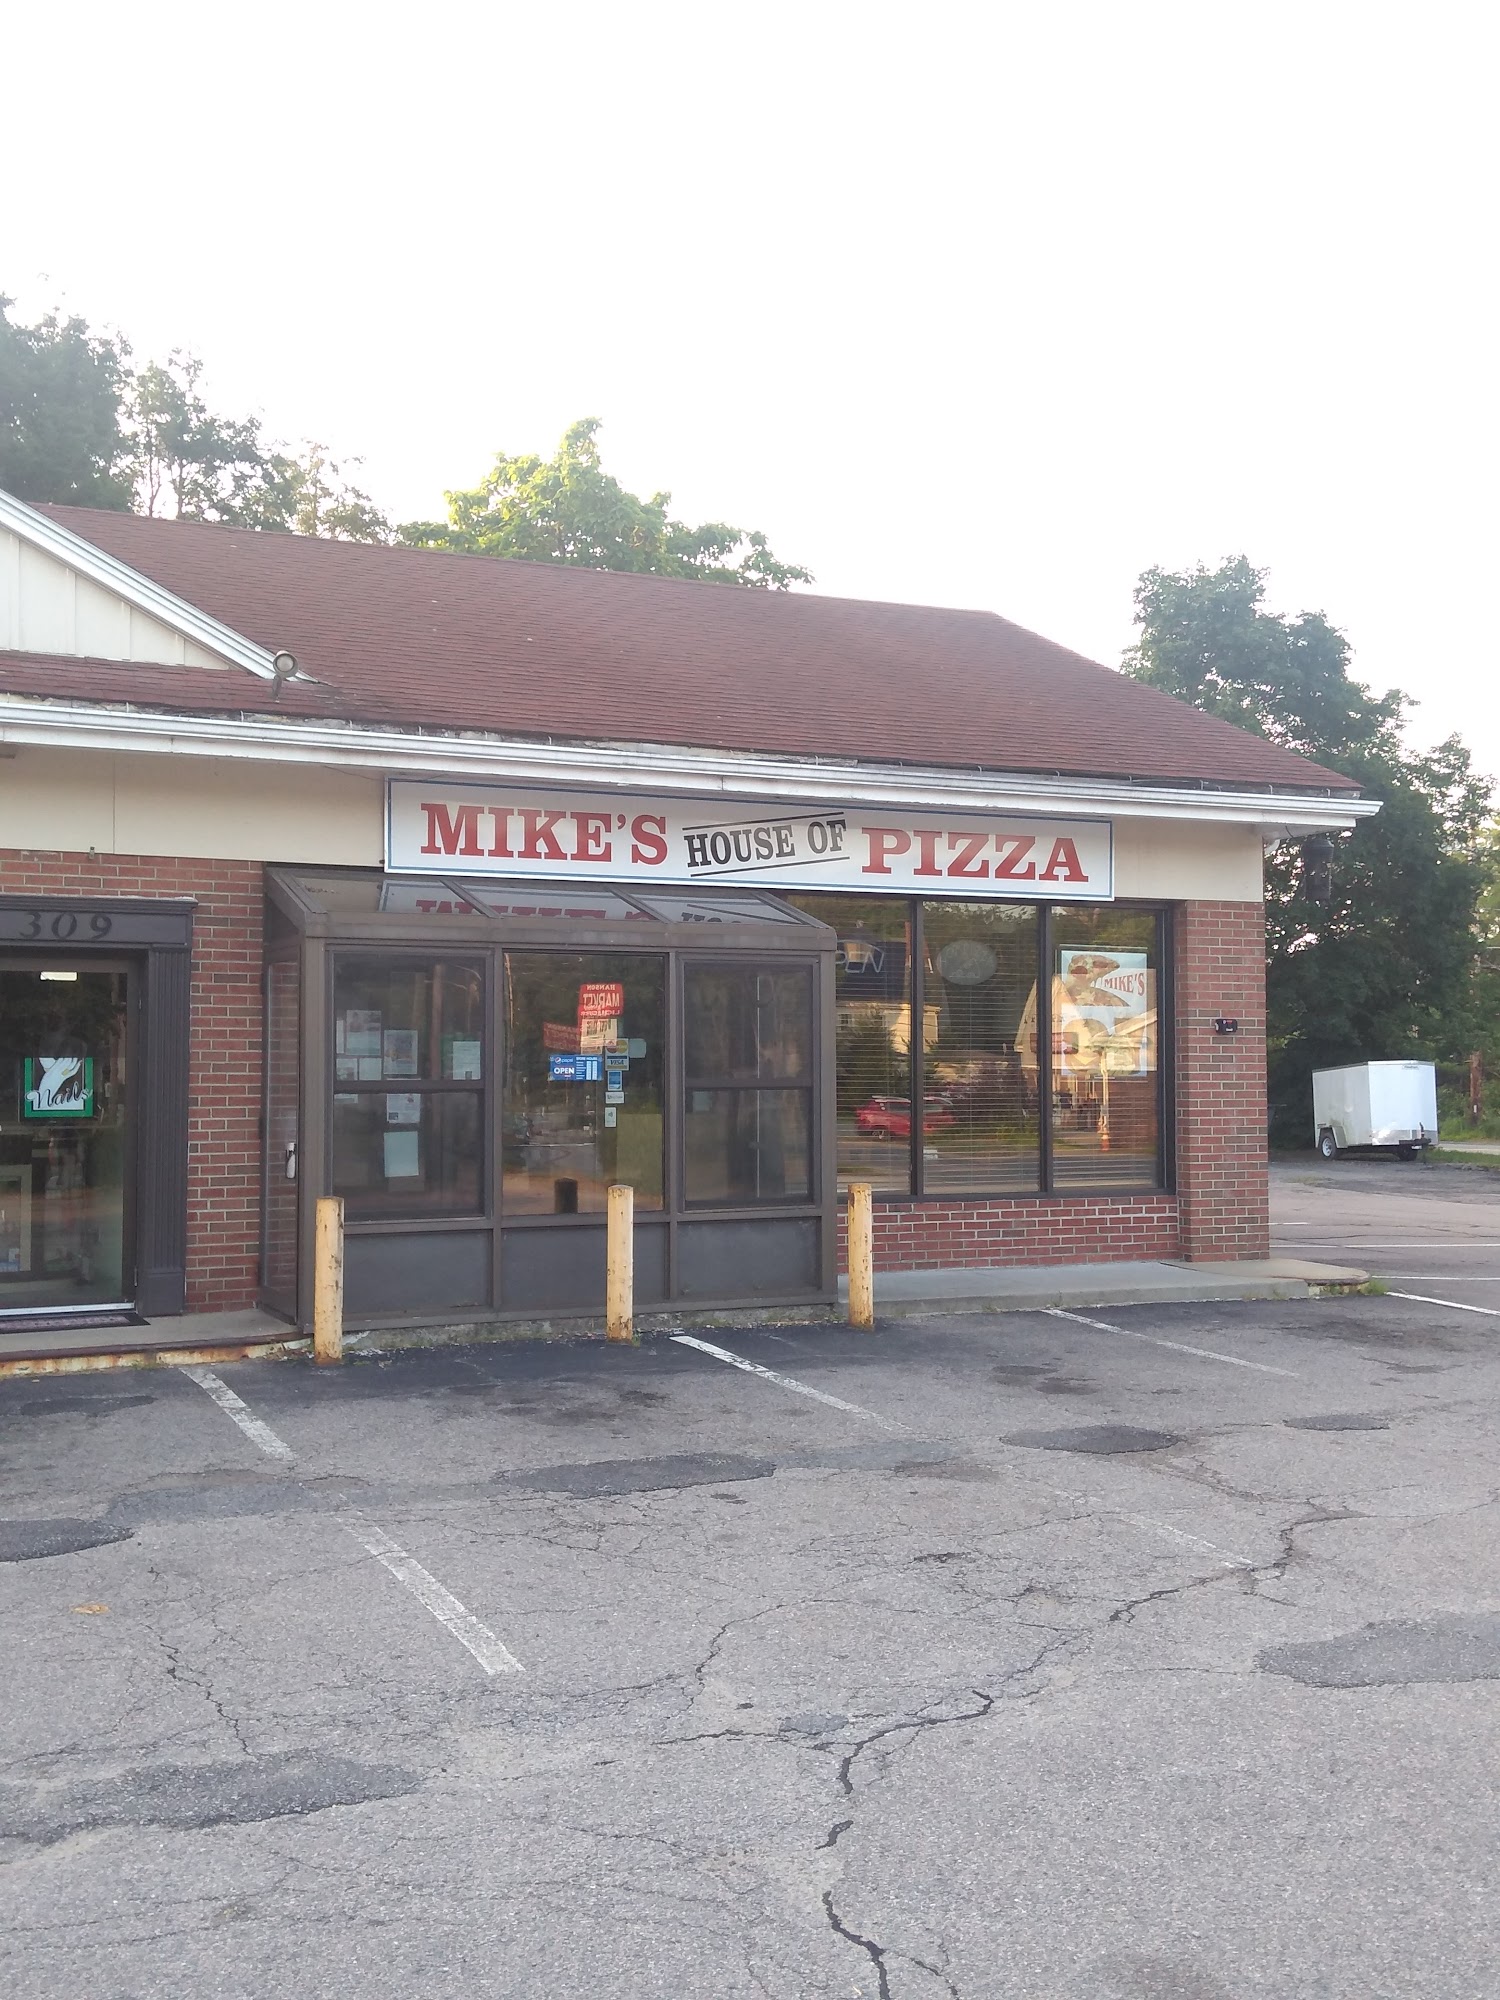 Mike's House of Pizza